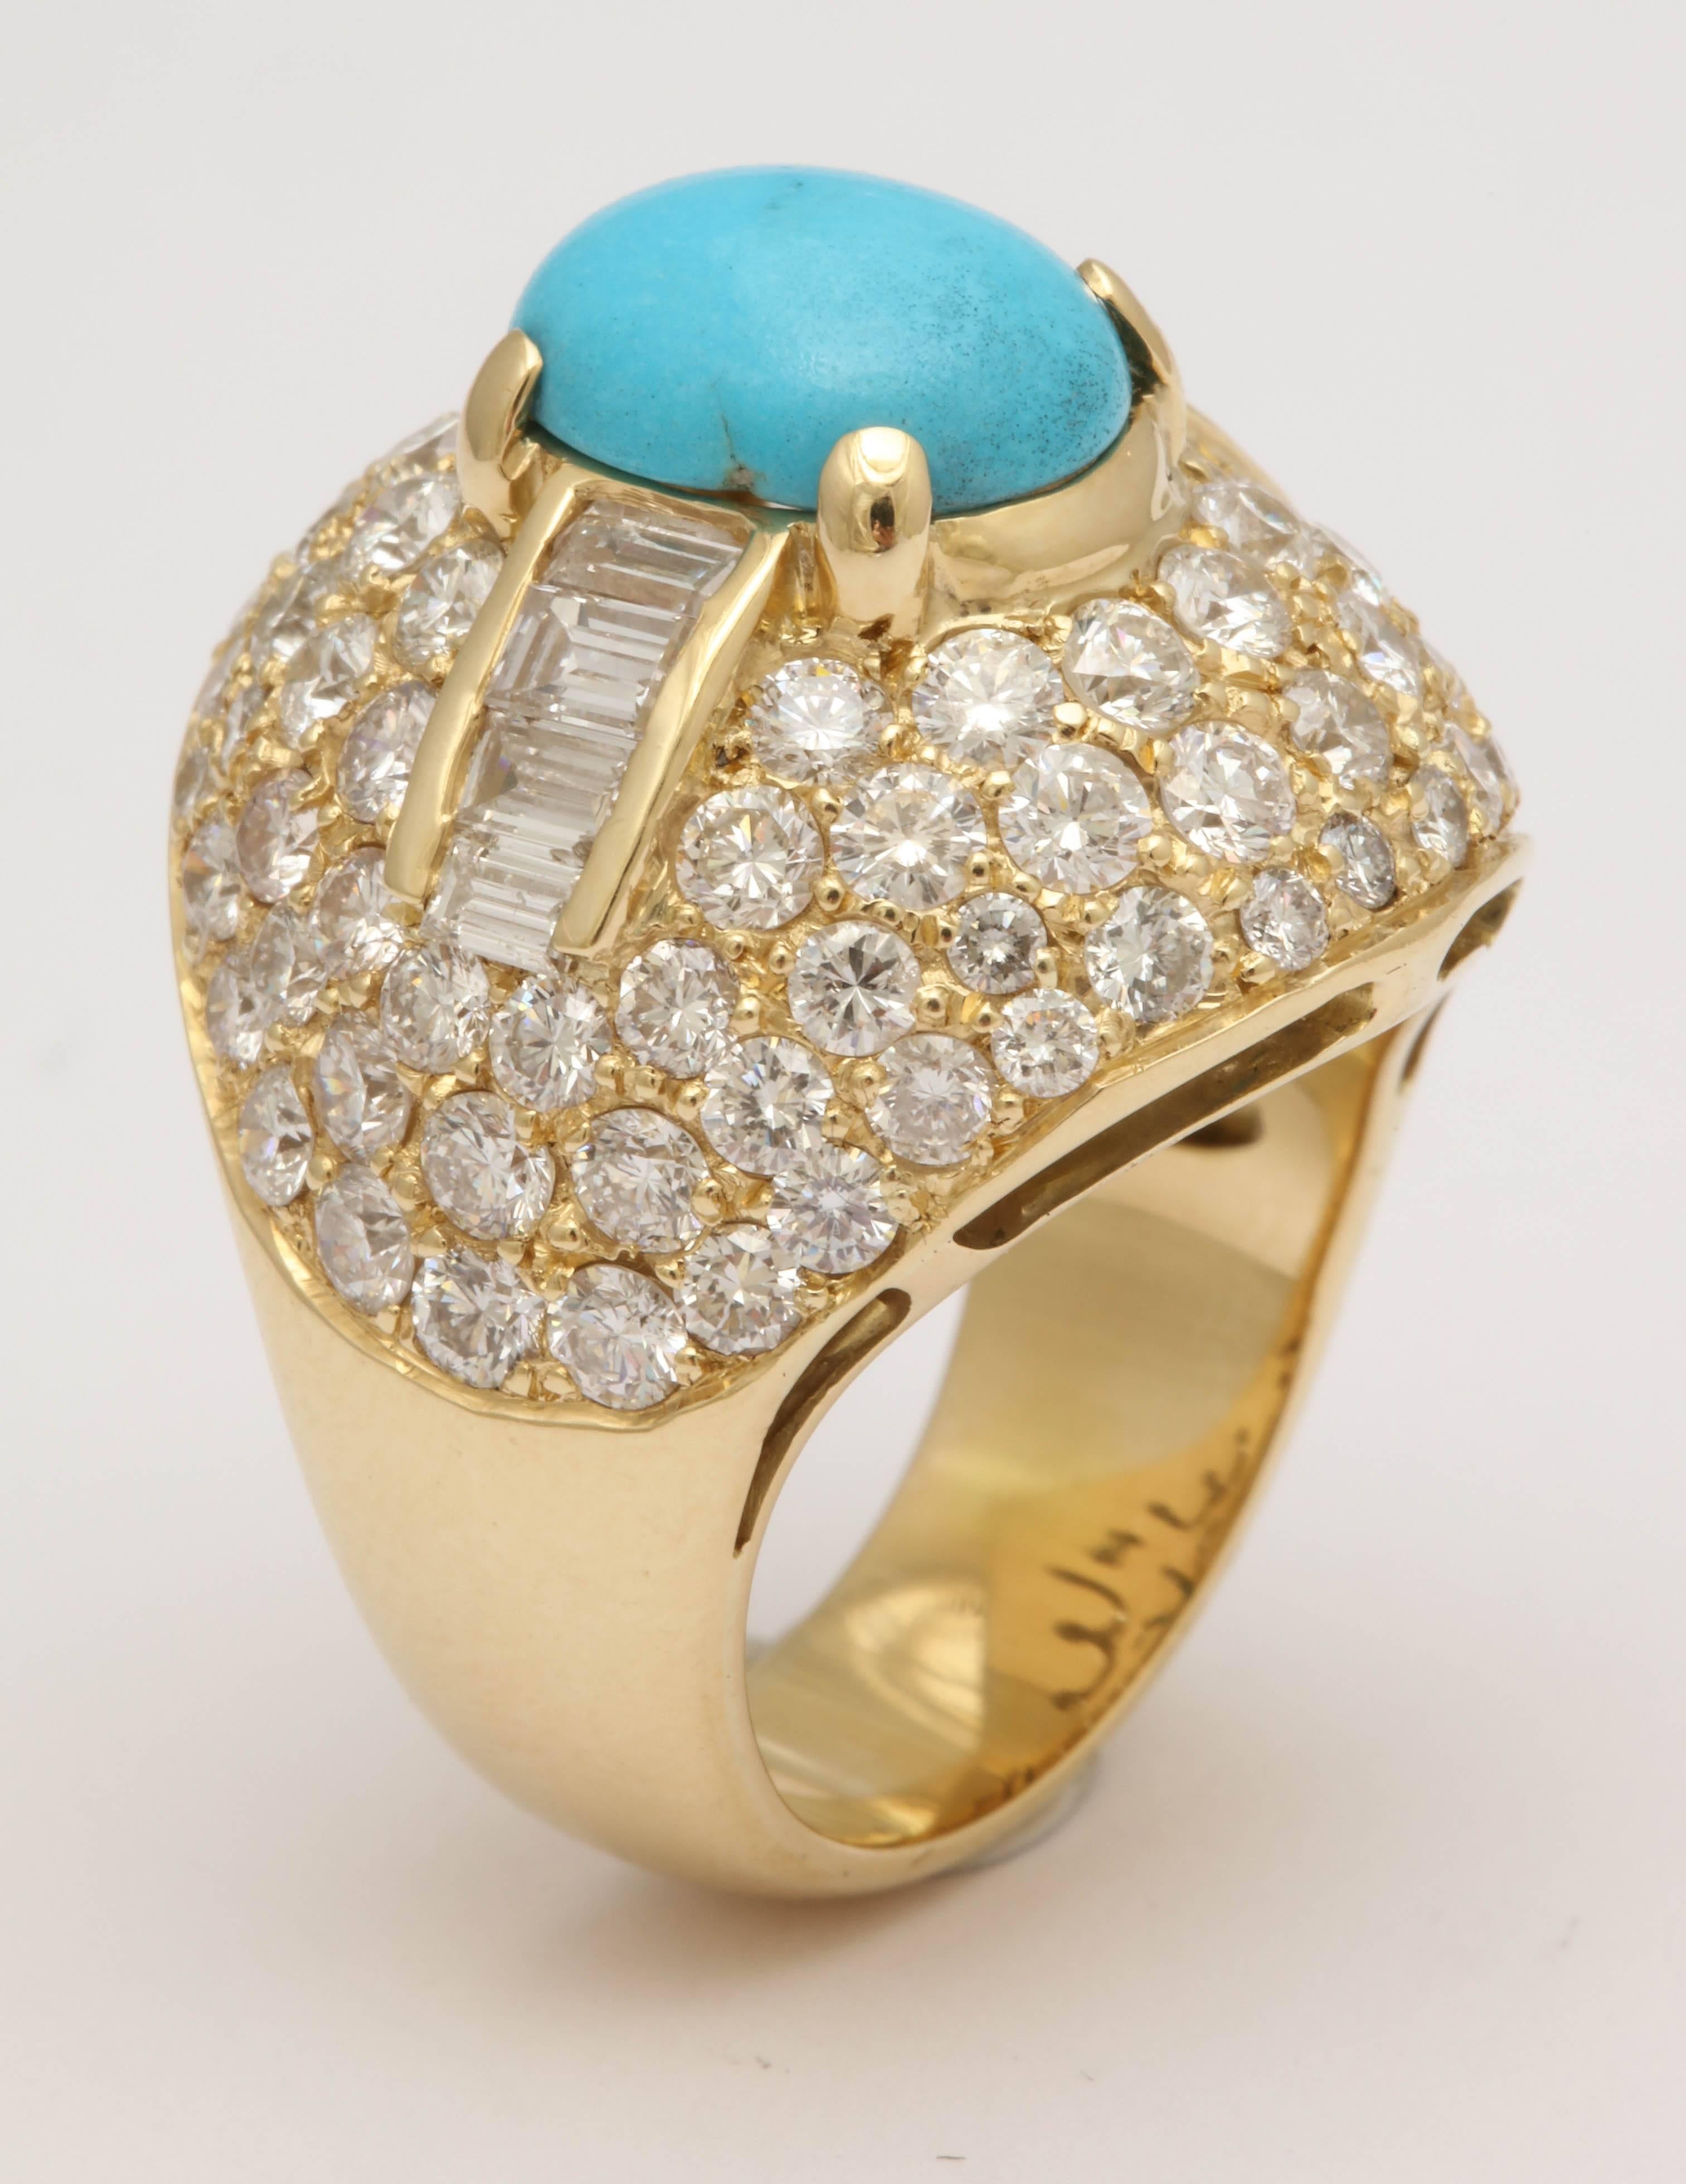 One Ladies fancy 18kt Yellow Gold Dome Ring Embellished with numerous High Quality Brilliant Cut diamonds Weighing Approximately 3.50 Cts And Flanked By Eight Baguette Cut Diamonds Weighing Approximately .50 Cts Total. Total diamond Weight